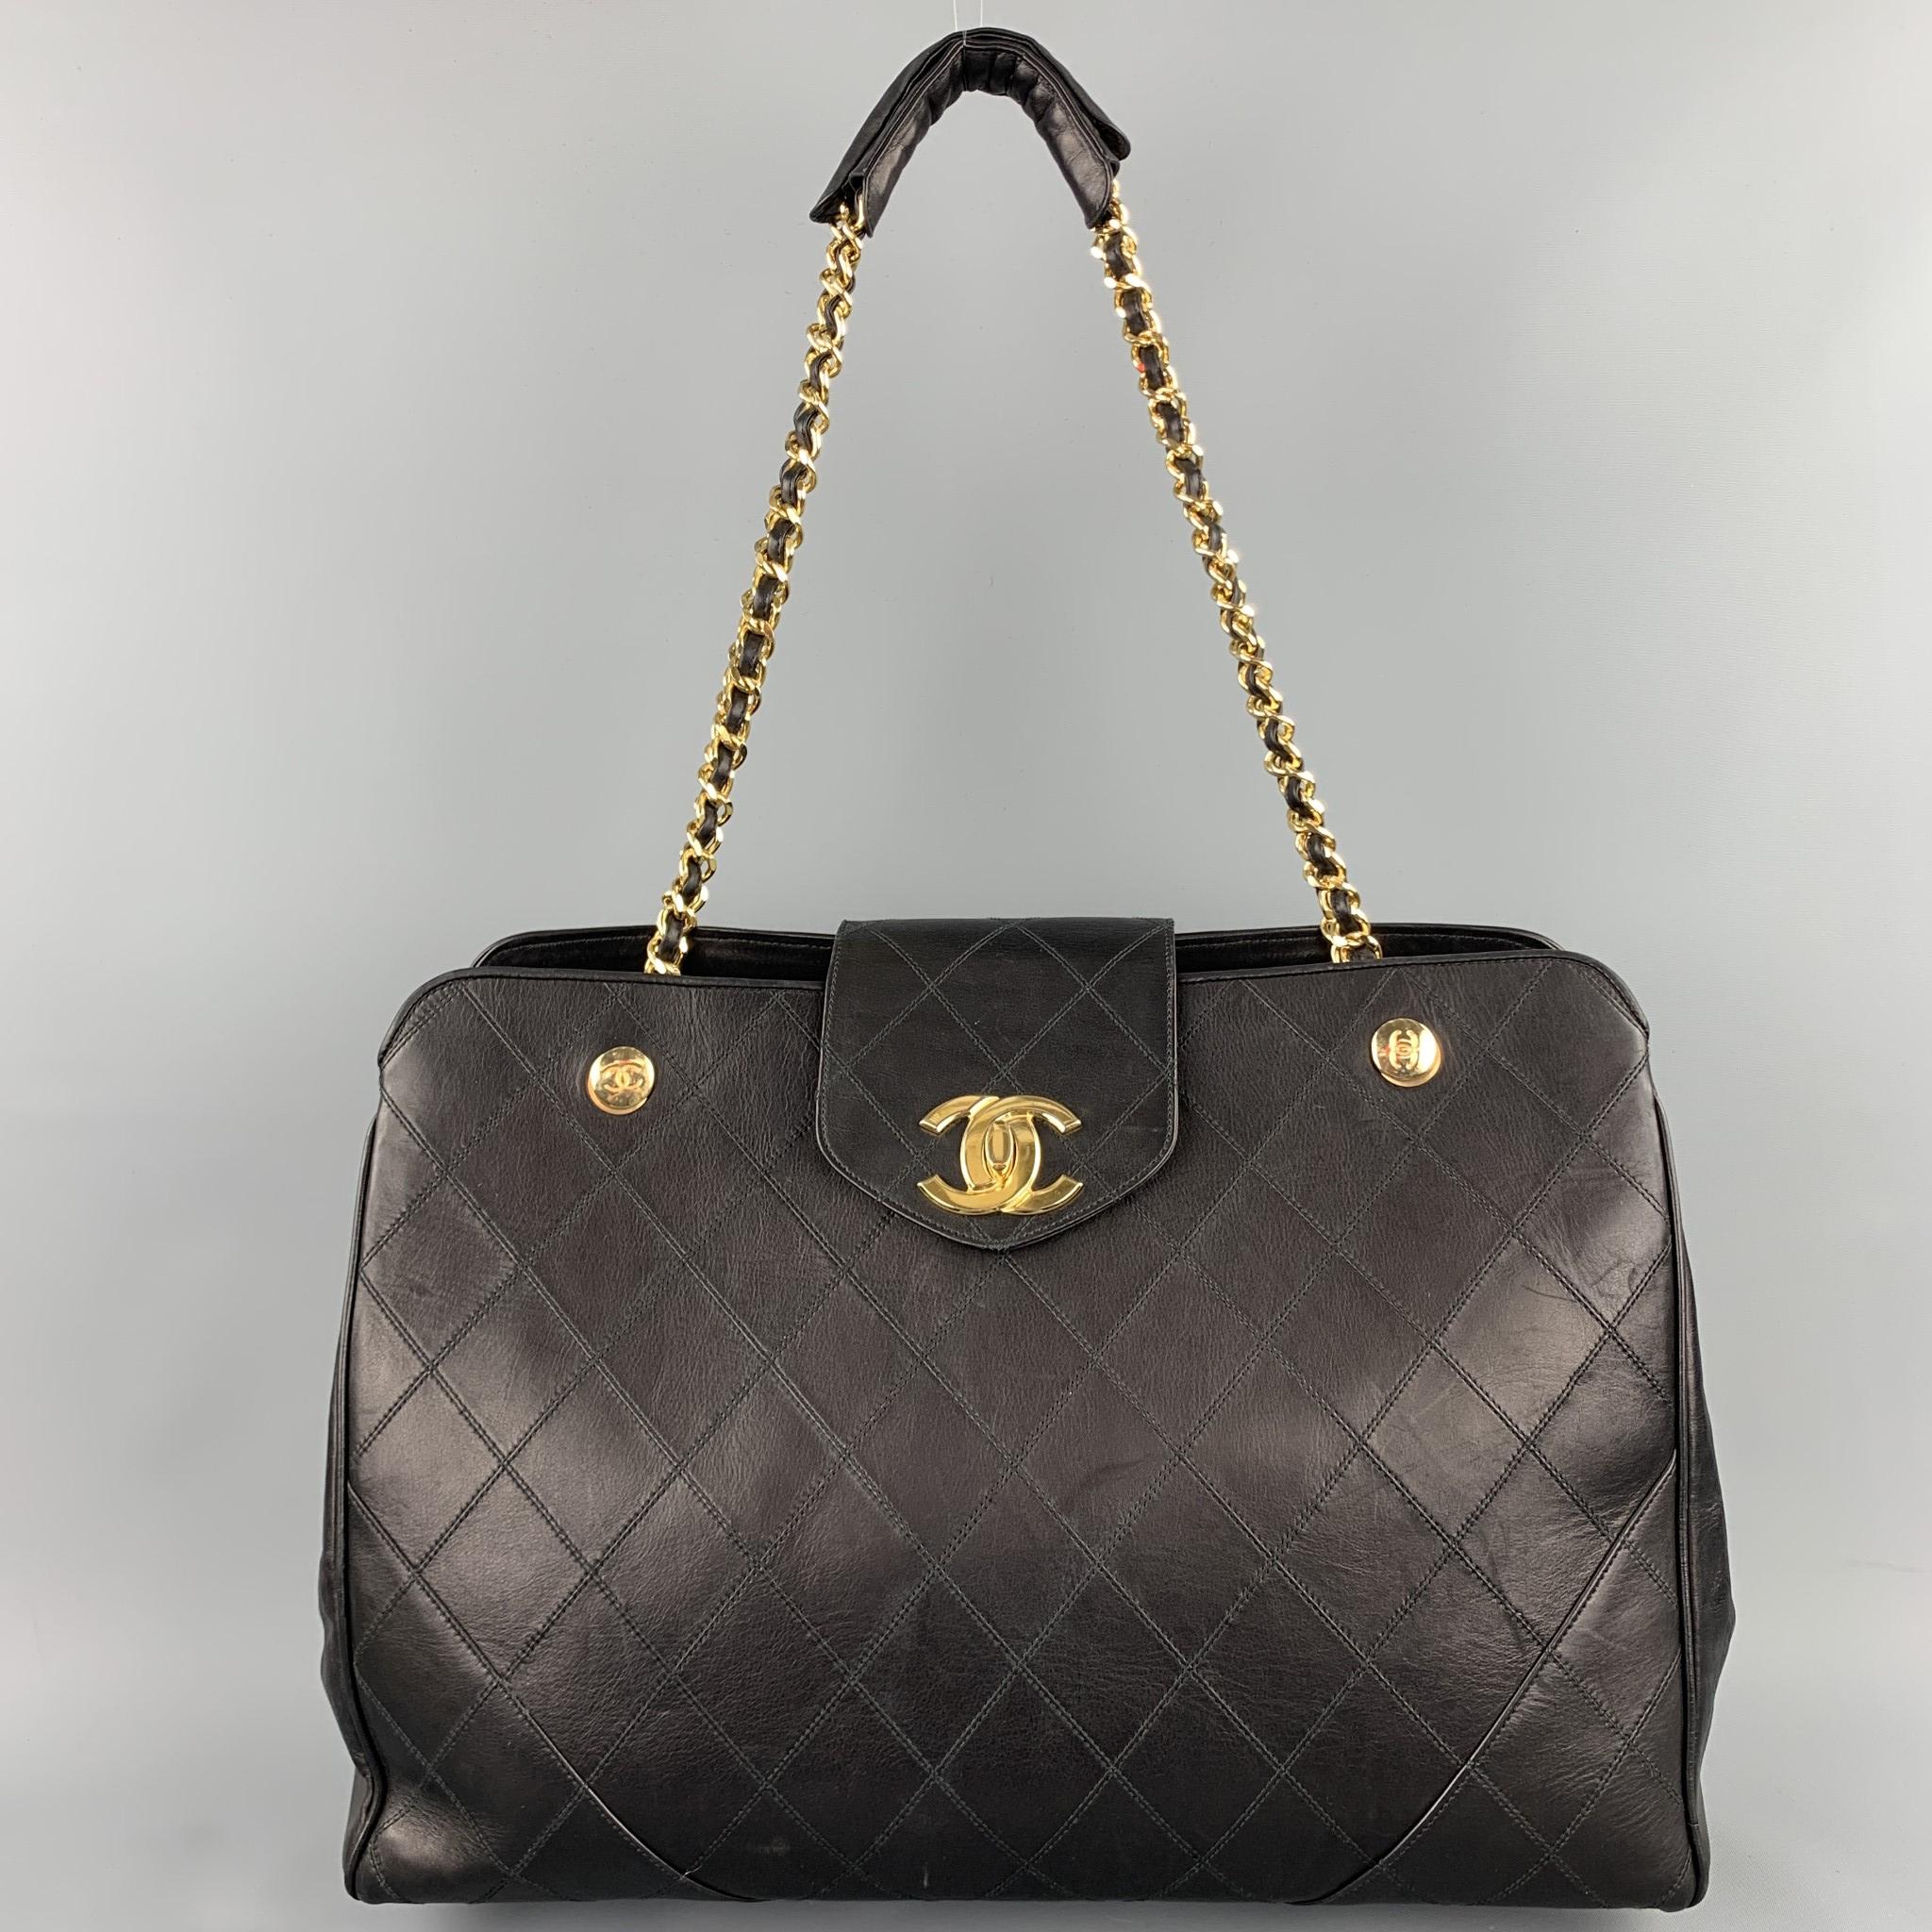 Vintage CHANEL Supermodel jumbo handbag comes in a black quilted leather featuring a front CC logo design, gold tone hardware, chain shoulder strap, burgundy interior, three inner slots, zipper pockets, and a top zipper closure. Made in